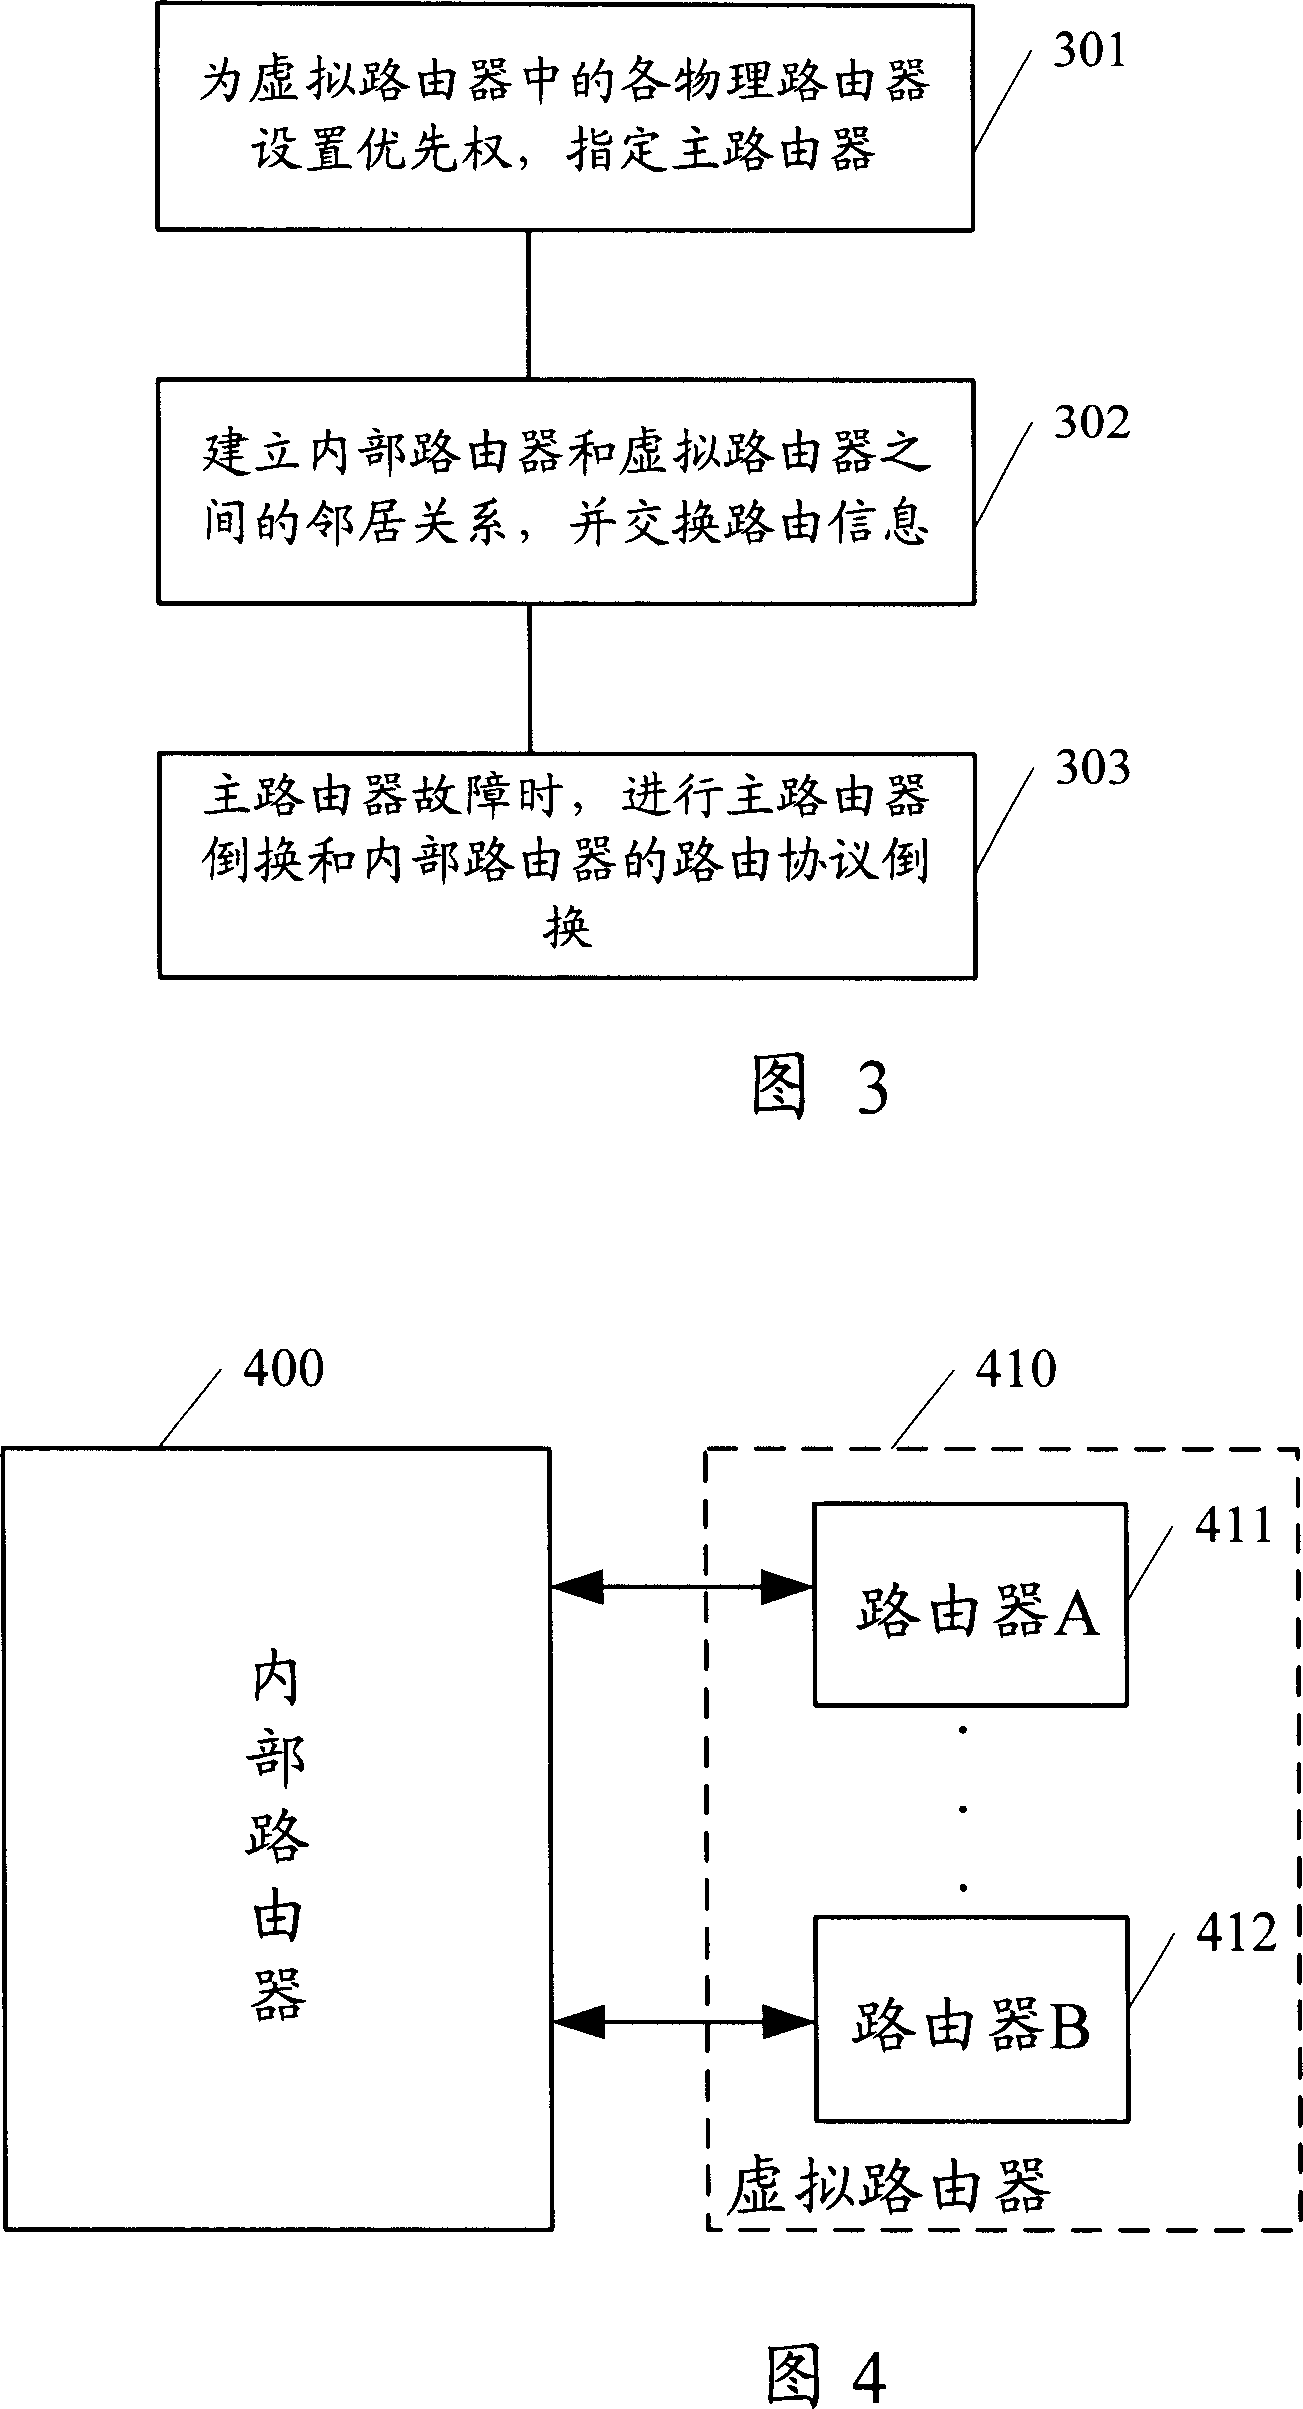 Method and system for communication between IP devices